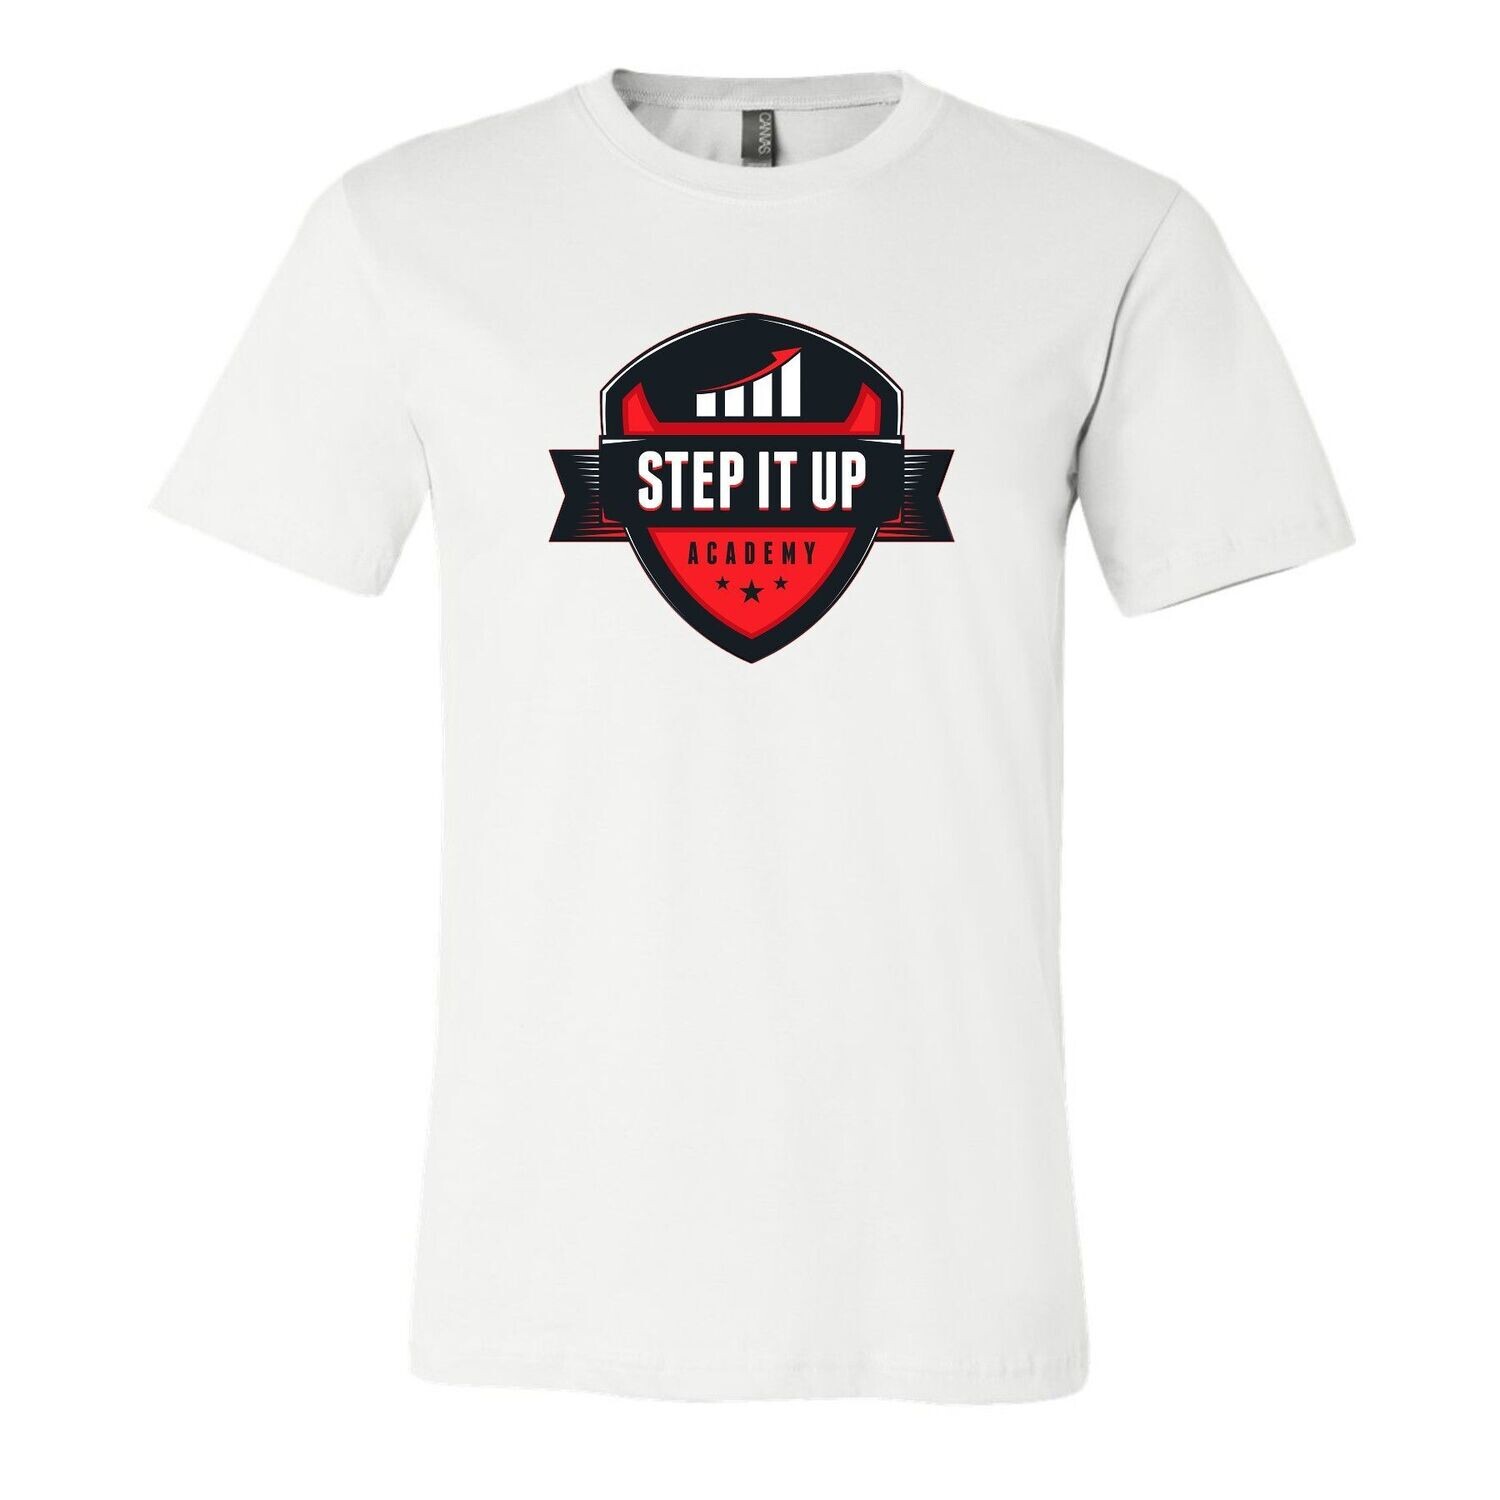 Step It Up Academy Tee - White